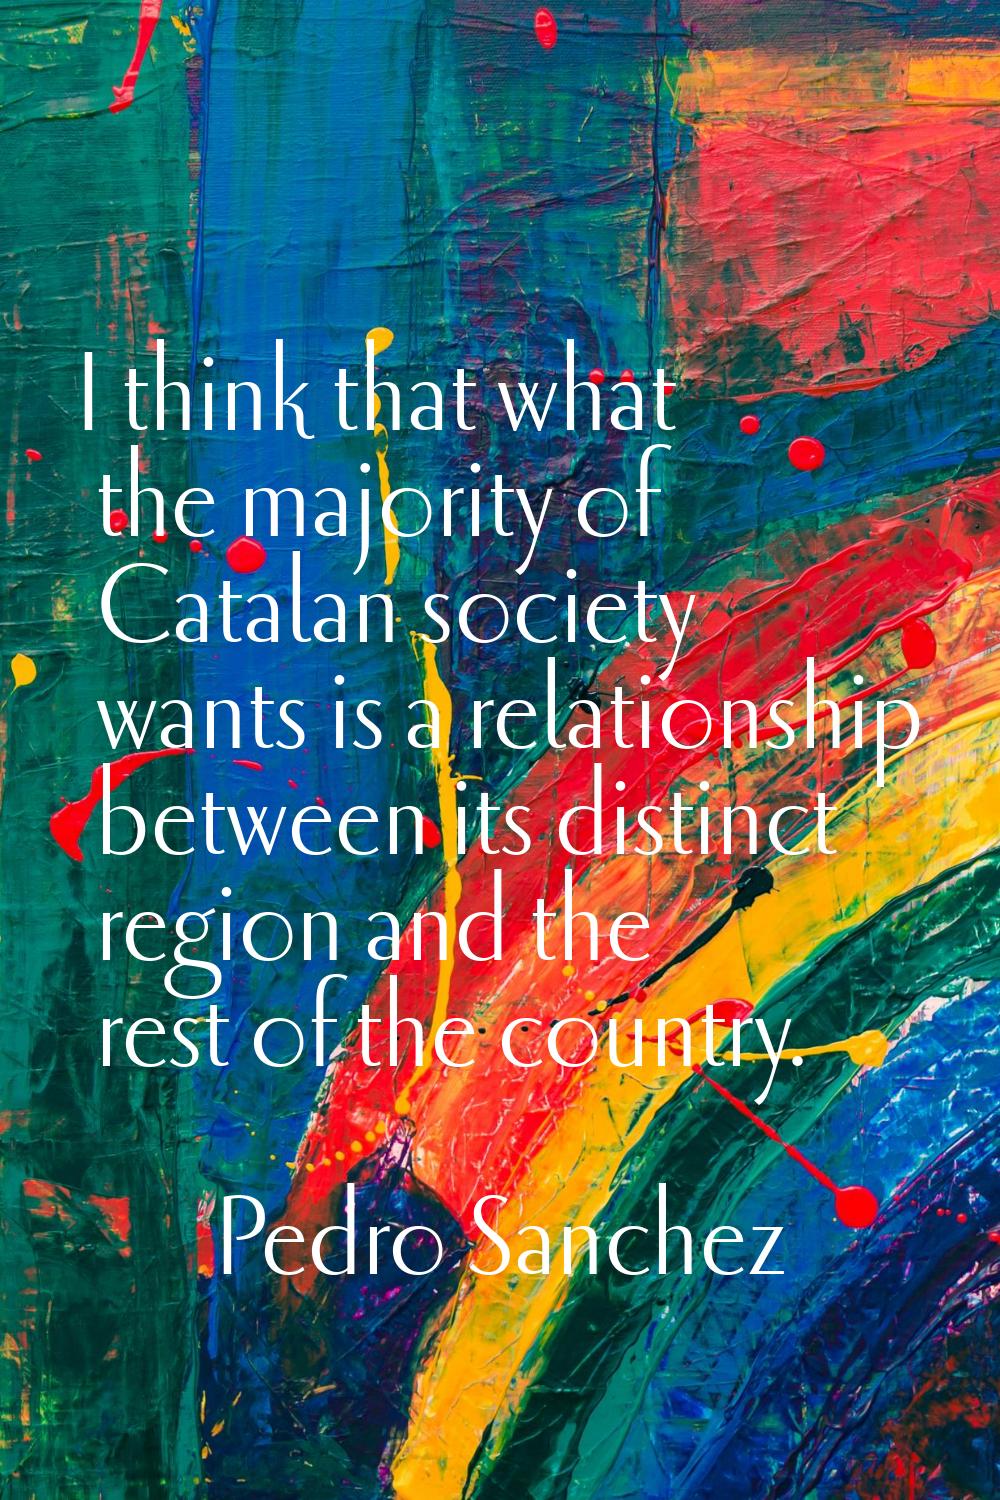 I think that what the majority of Catalan society wants is a relationship between its distinct regi